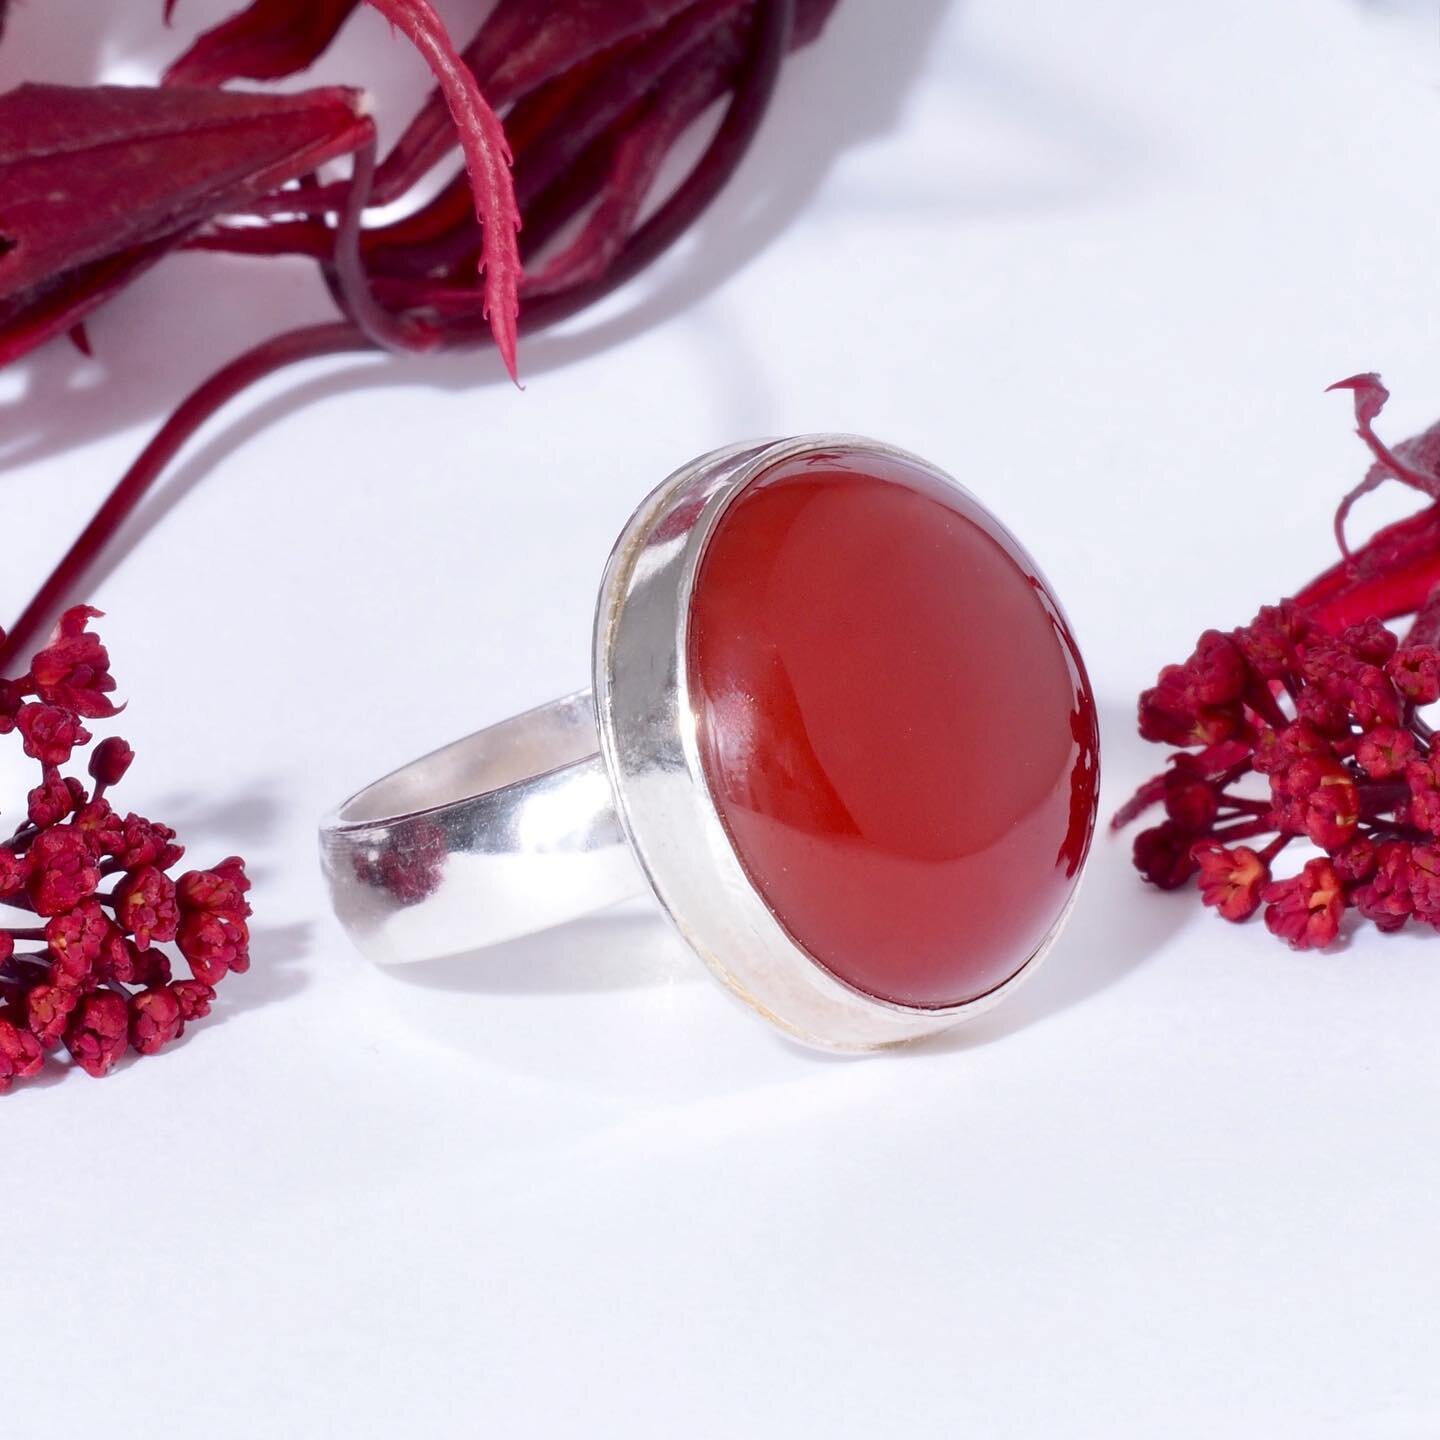 Colors of nature - impressive carnelian cabochon in the same hues as newly emerging leaves and flowers of a red Japanese Maple tree.  This large carnelian is set in shiny recycled sterling silver on a comfort band in size 8 (we can resize it for you 